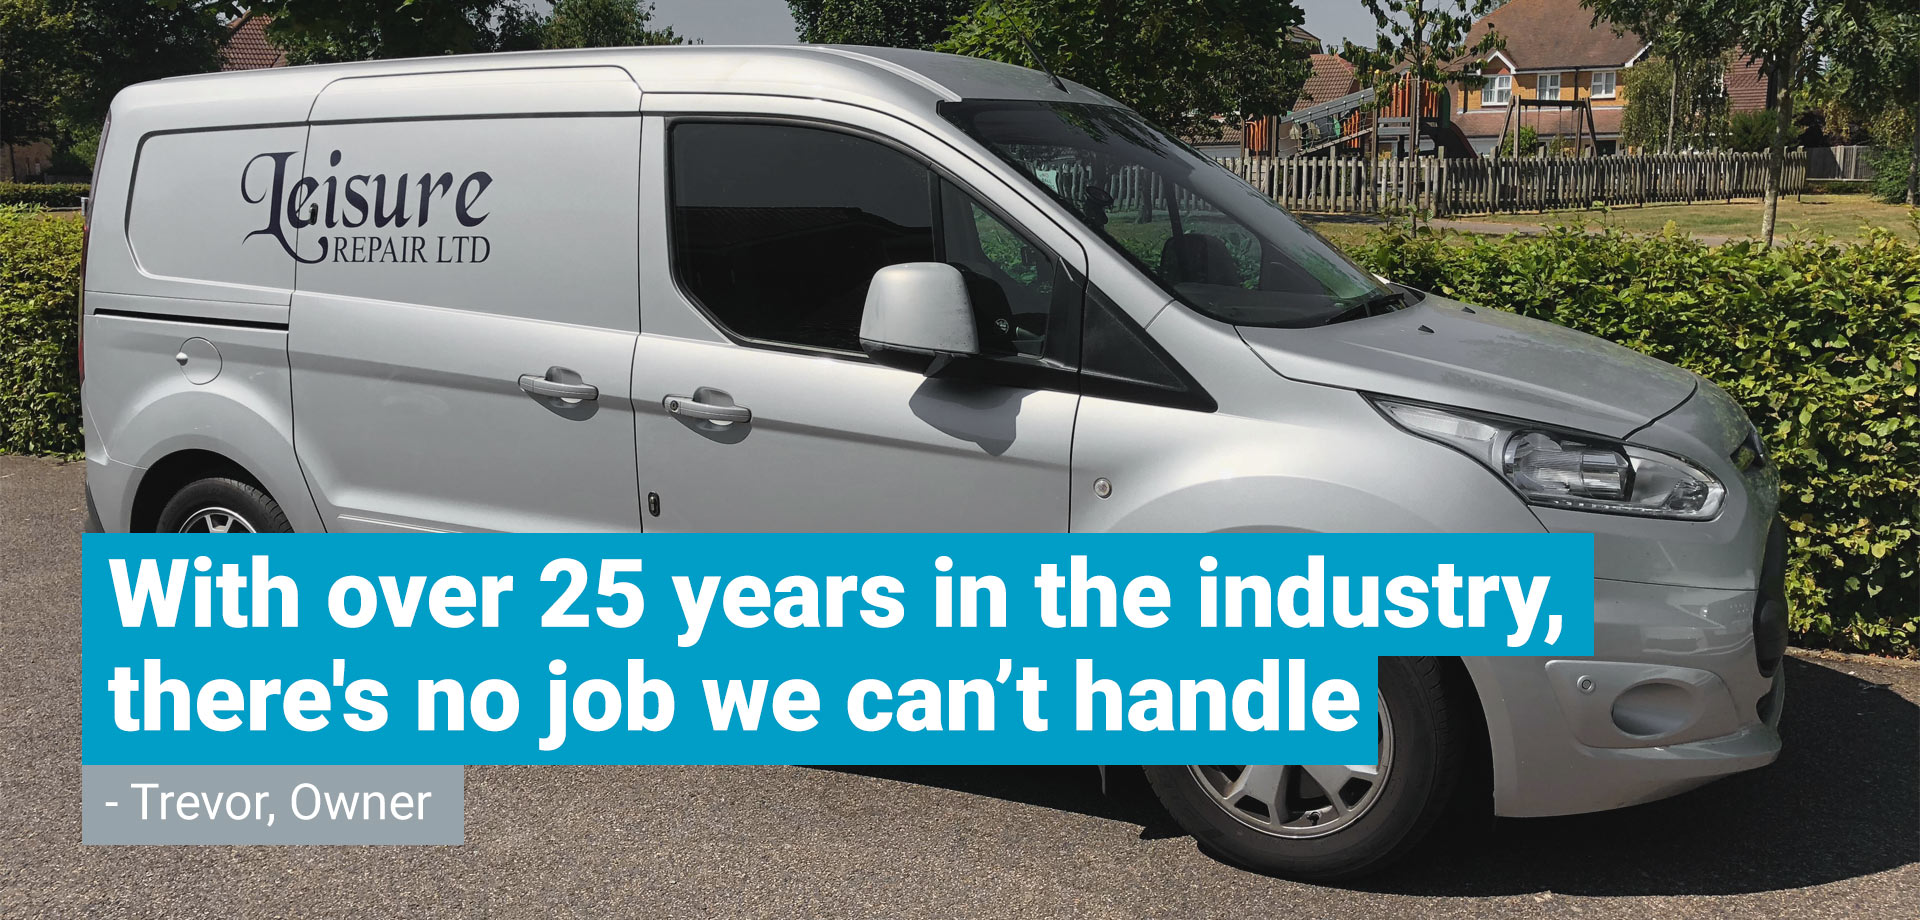 A photo of one of the Leisure Repair silver vans with a quote from trevor laid over the top saying "With over 25 years in the industry, there's no job we can't handle"